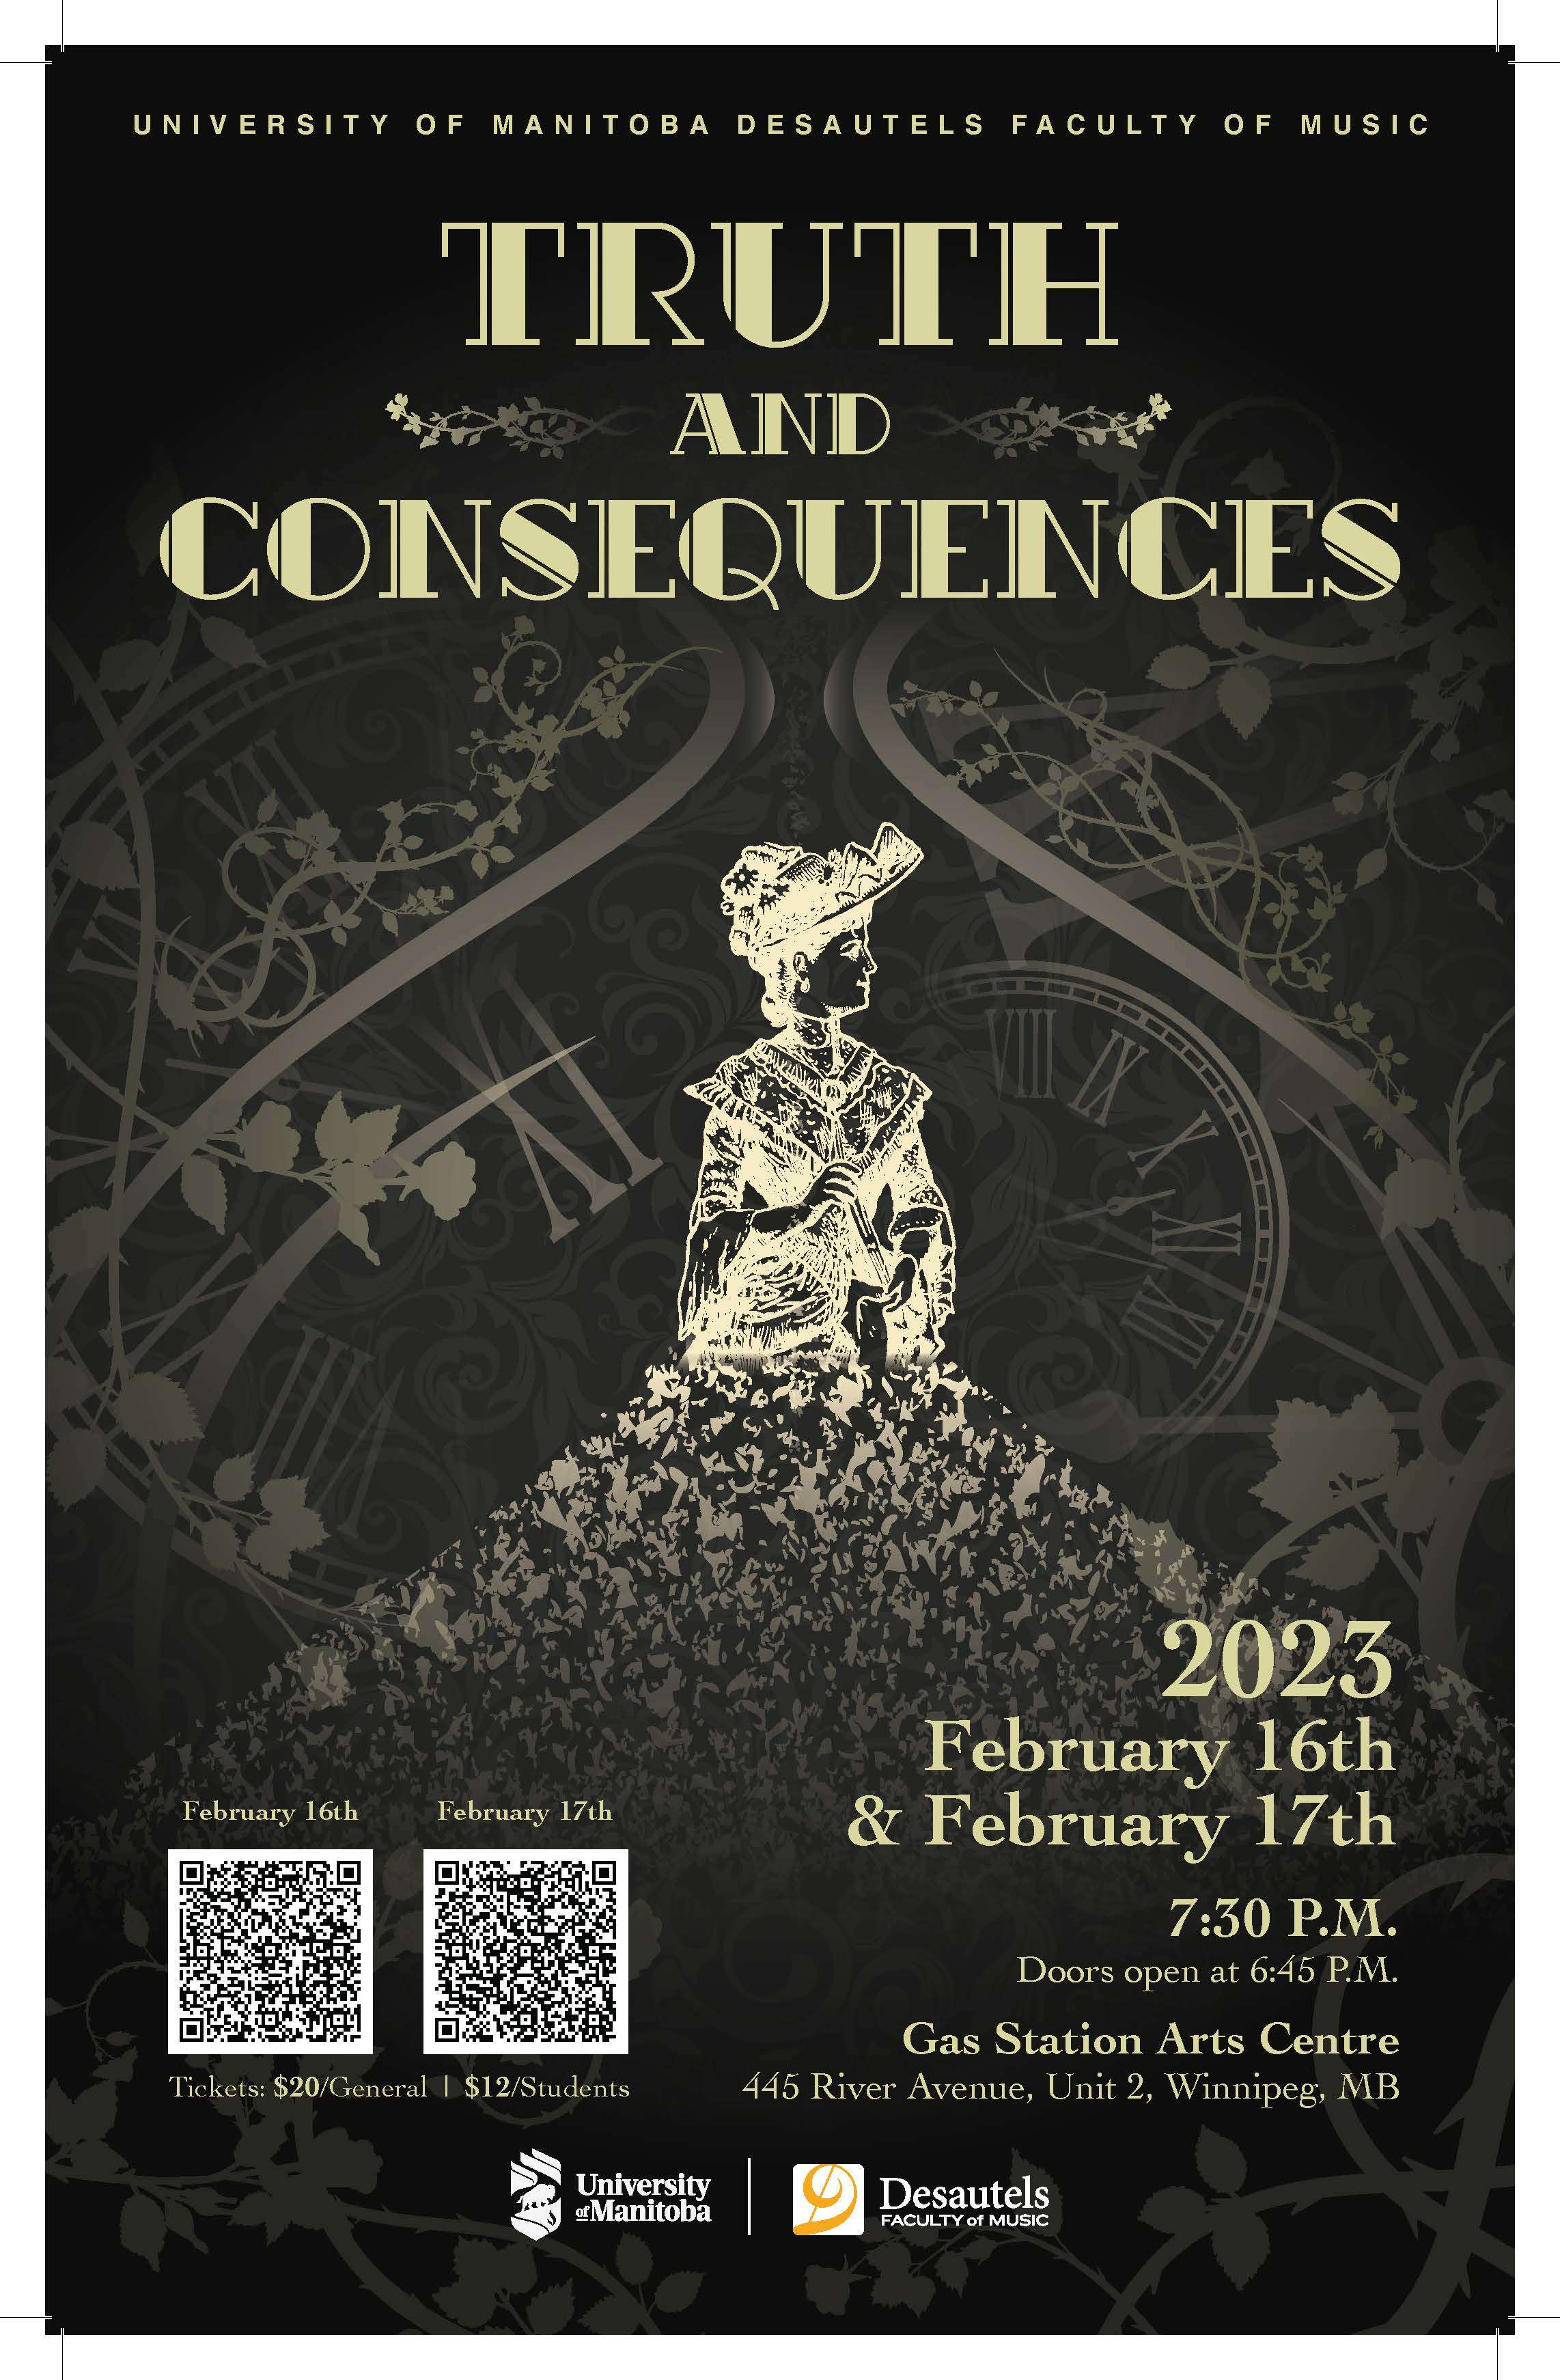 Desautels Faculty of Music Opera Theatre Presents: Truth and Consequences (Night 1)